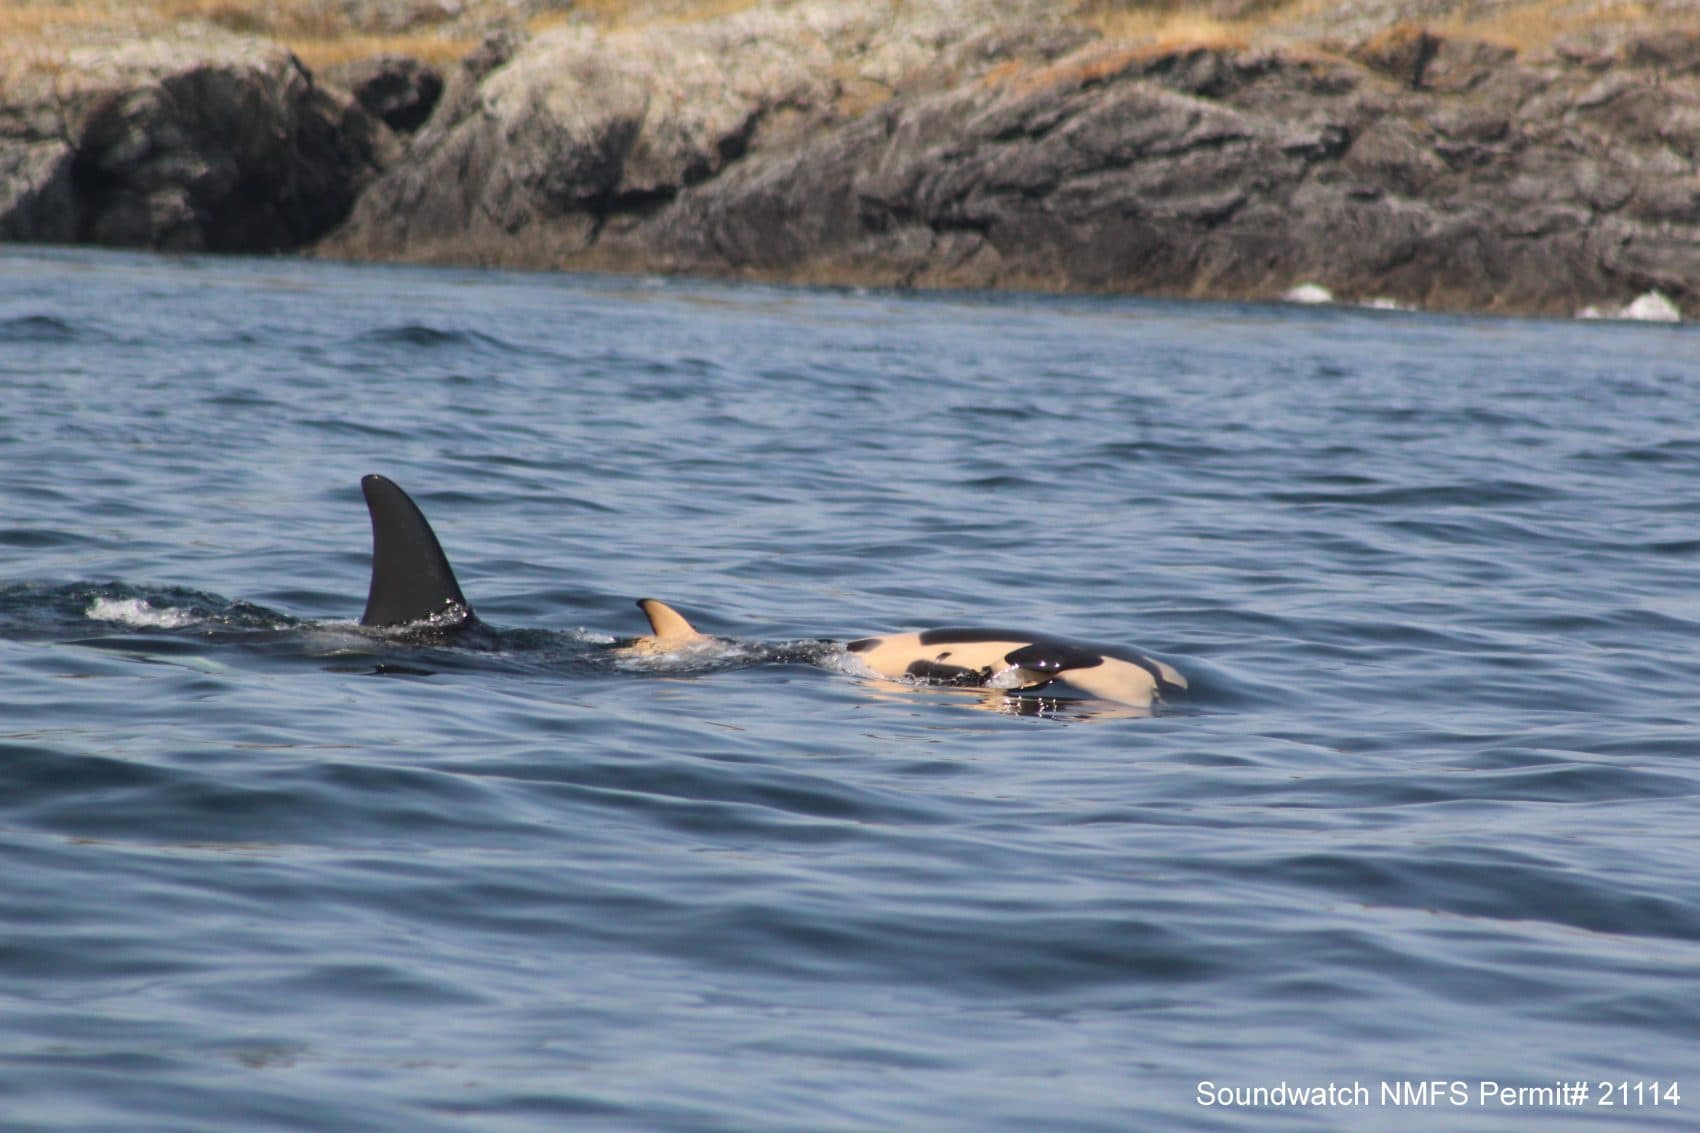 A female orca that appears to be grieving has been carrying her dead calf in the water, keeping it afloat since the baby died a week ago. (Taylor Shedd/Soundwatch, taken under NMFS MMPA permit #21114)